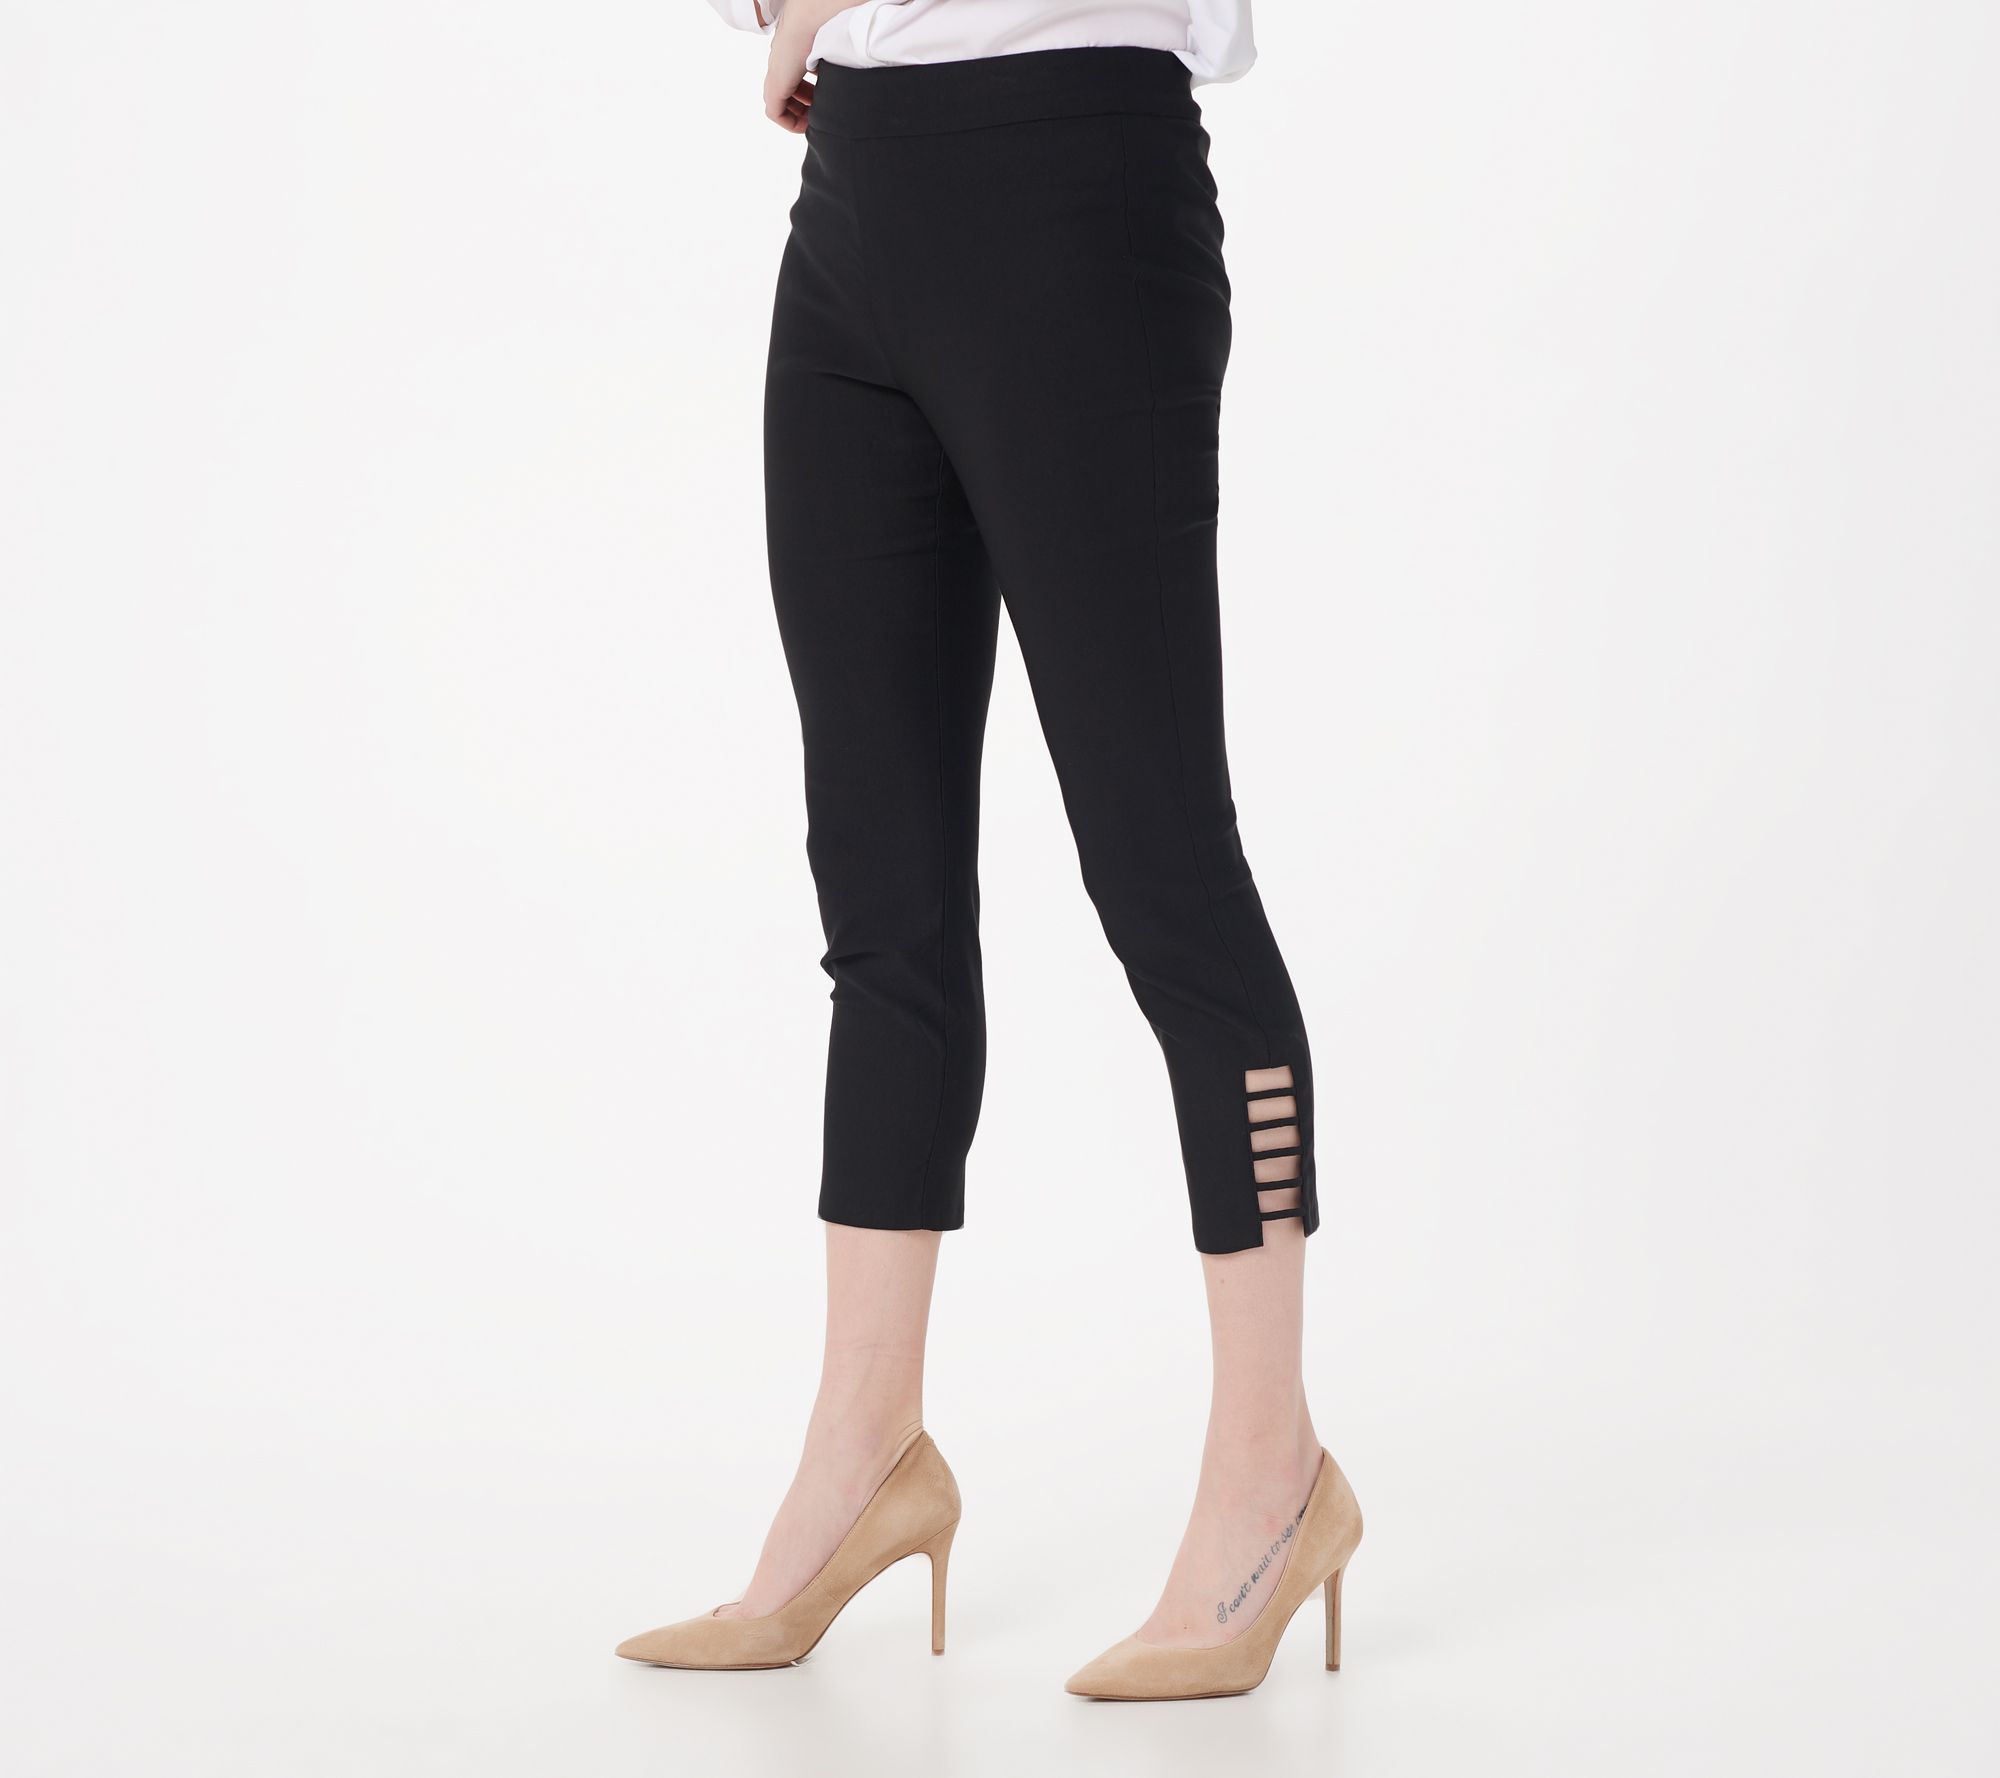 Jm Collection Women's Pull On Slim-Fit Cropped Pants, Created for